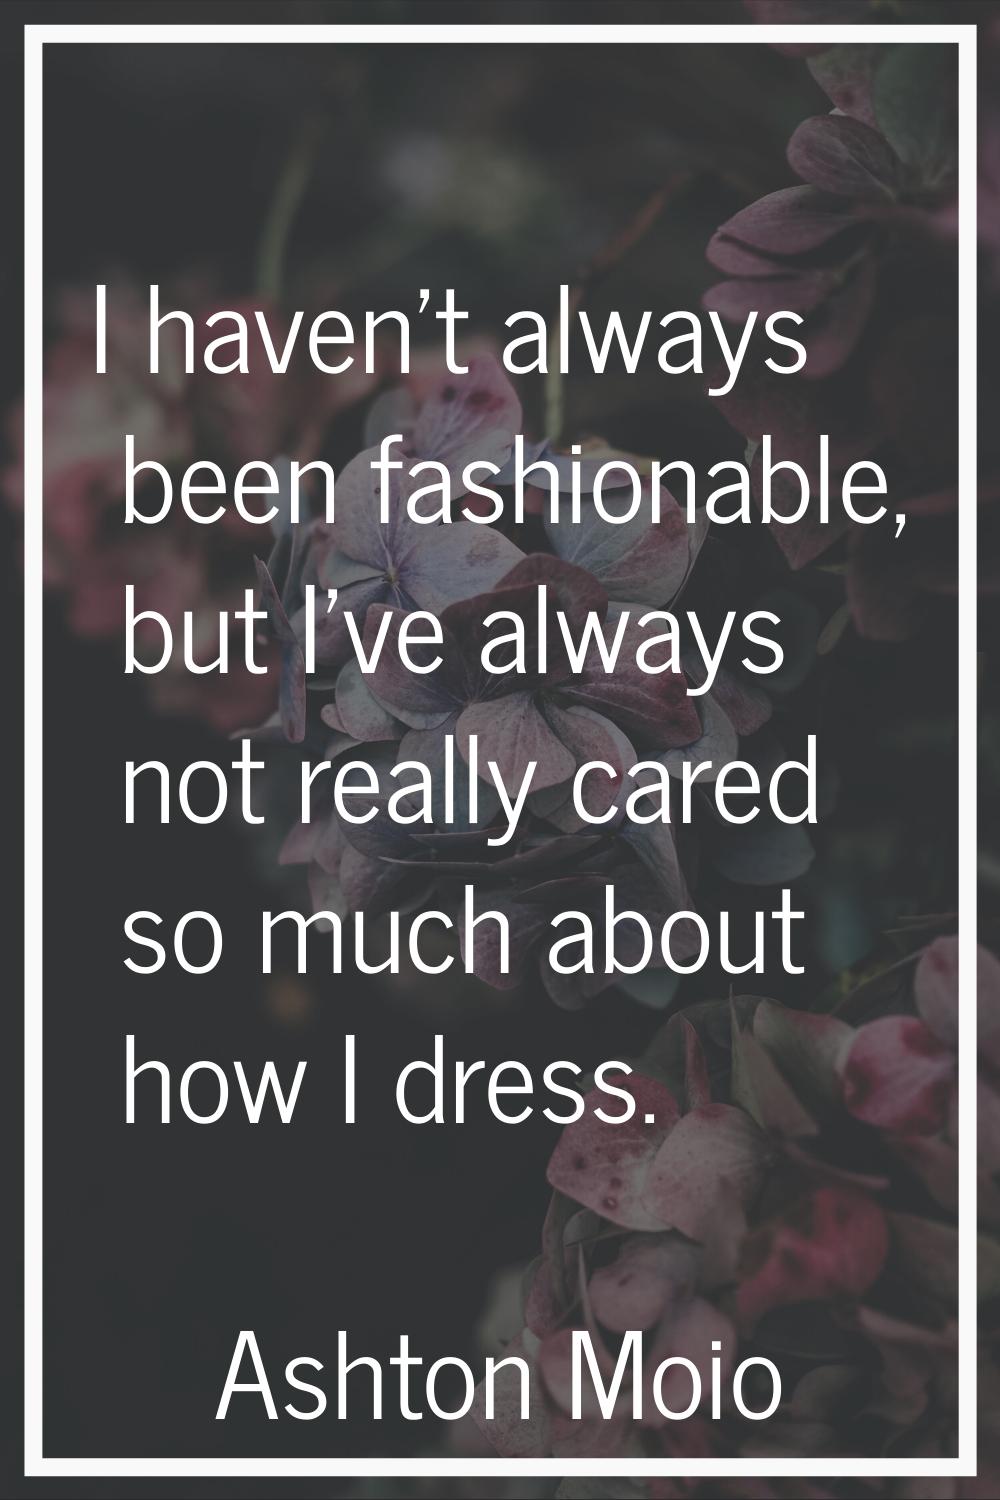 I haven't always been fashionable, but I've always not really cared so much about how I dress.